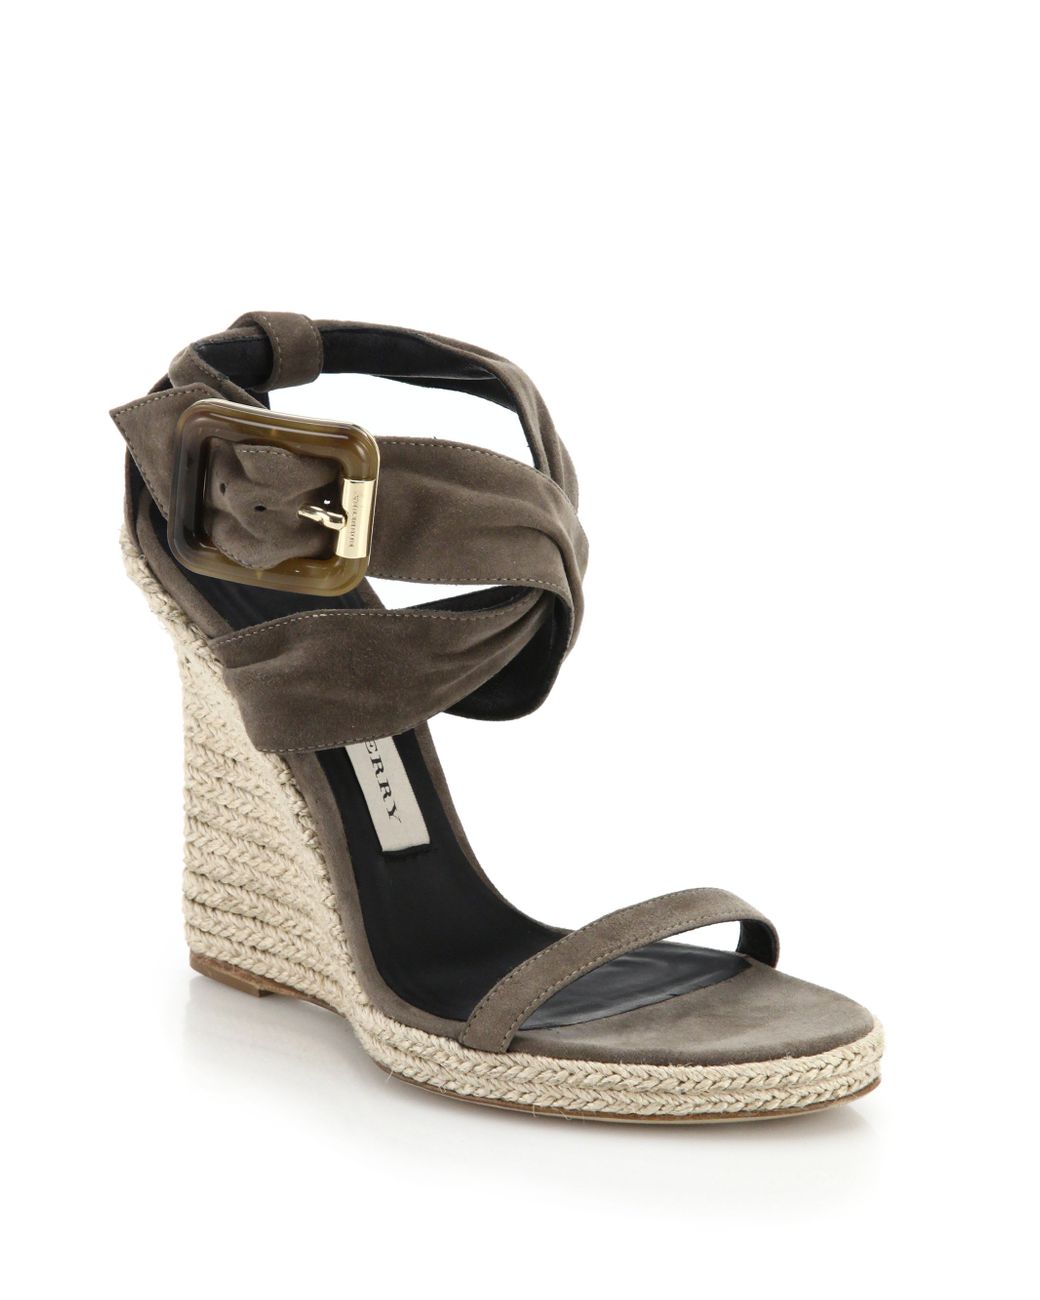 Burberry Catsbrook Suede Espadrille Wedge Sandals in Gray | Lyst